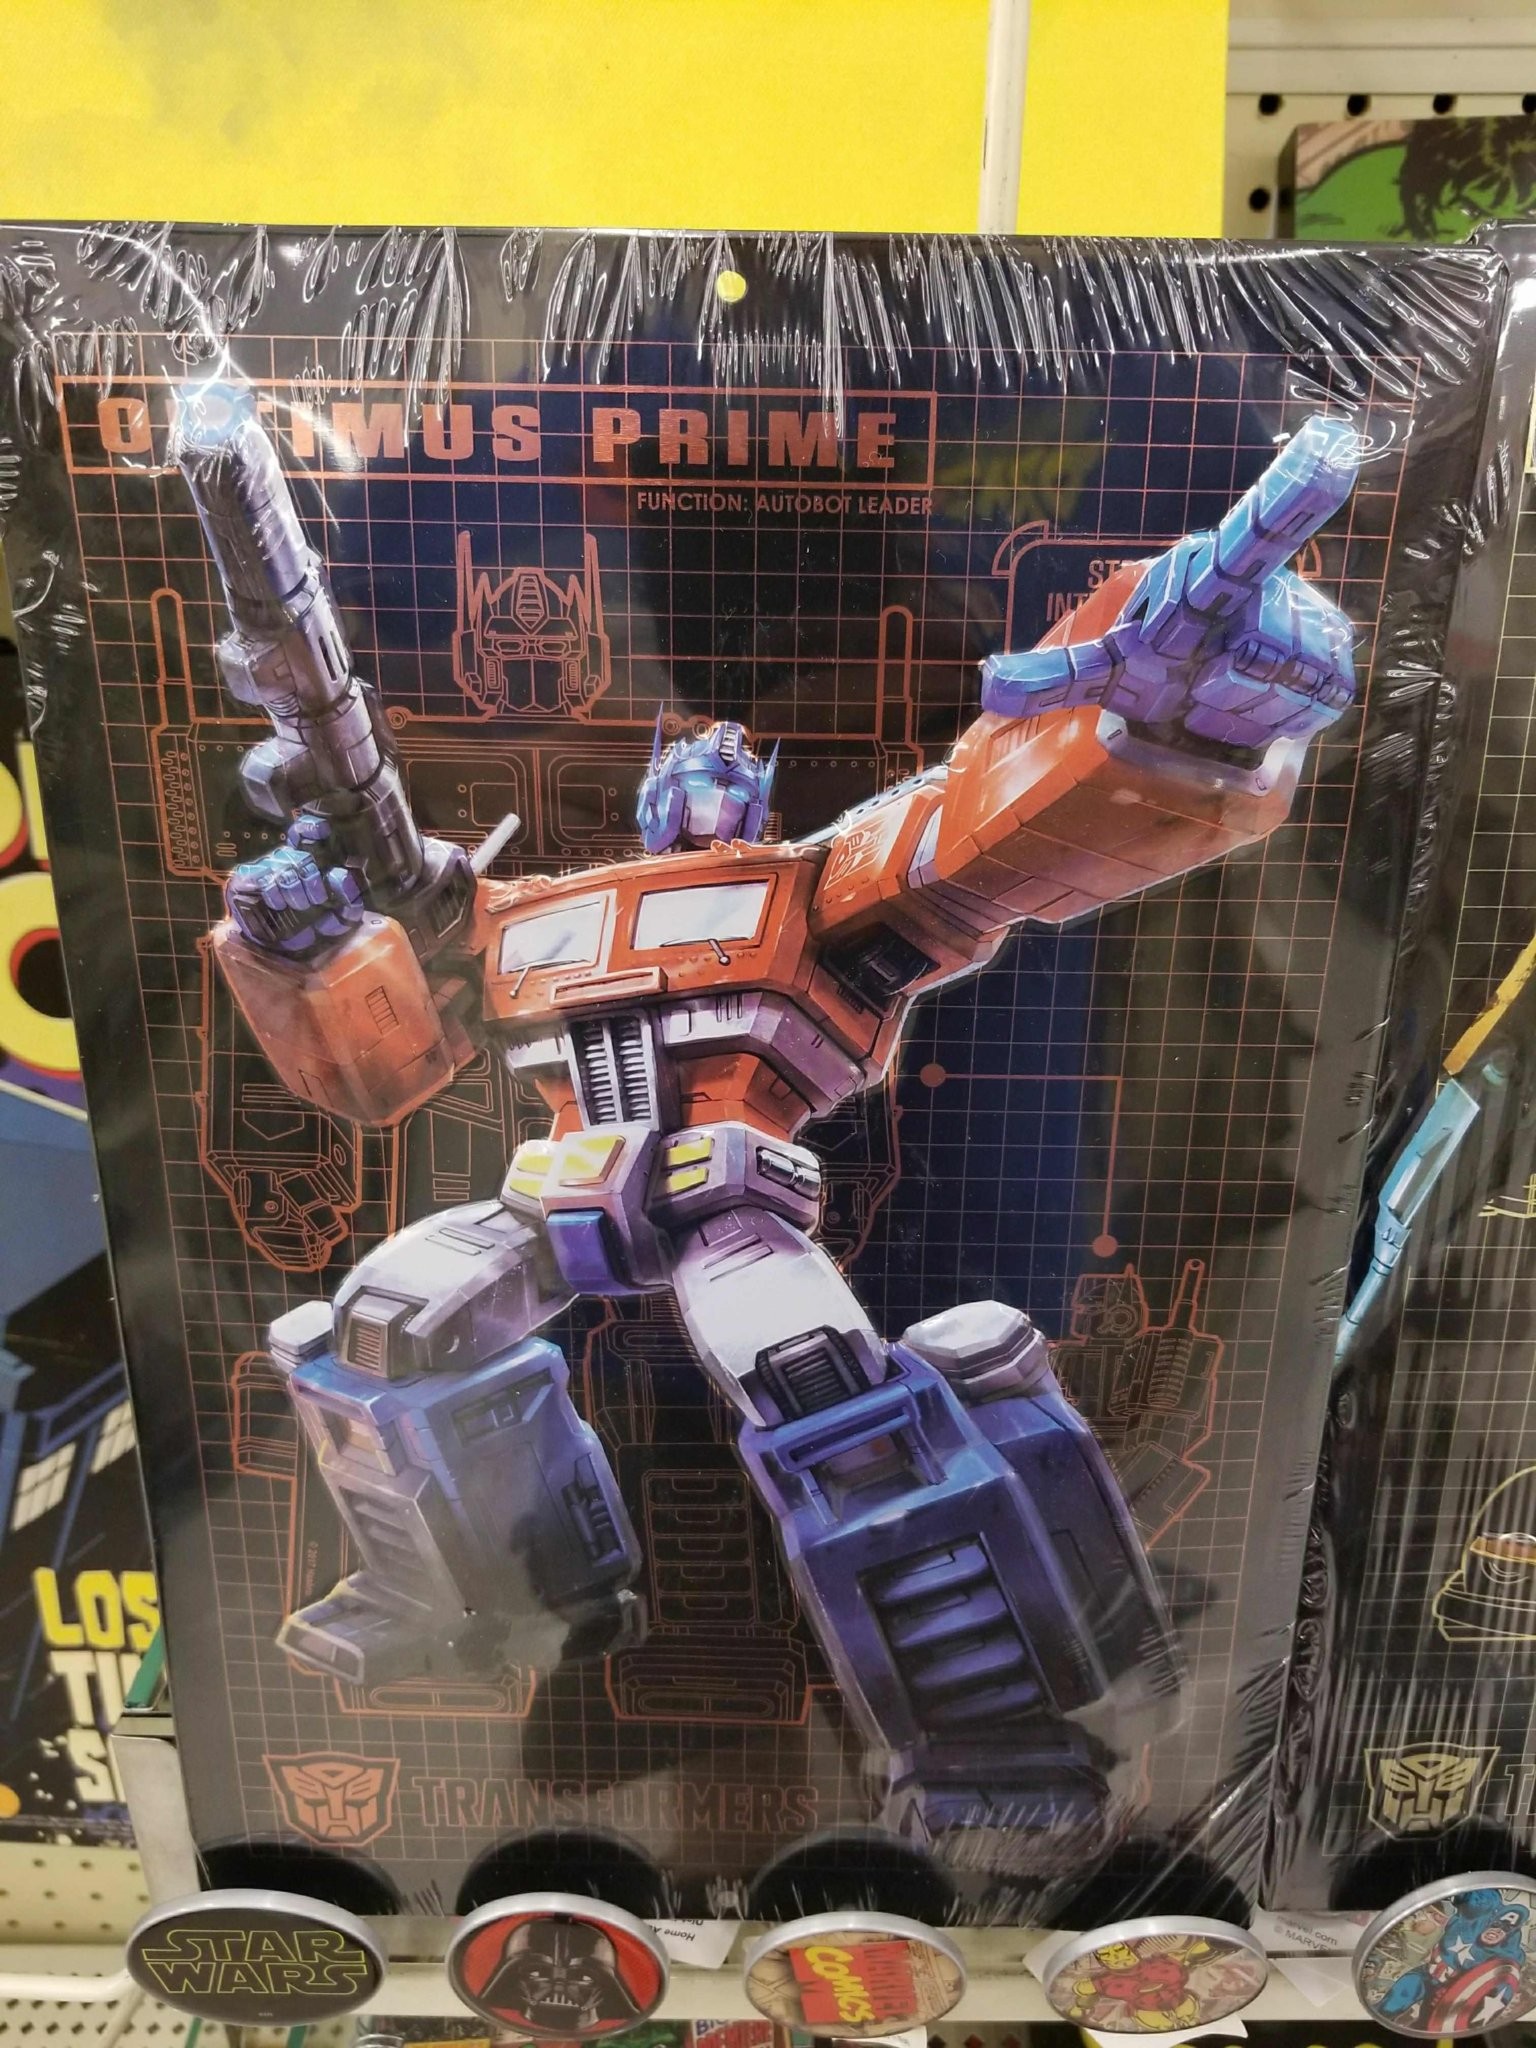 Spotted these model kits at Hobby Lobby : r/transformers